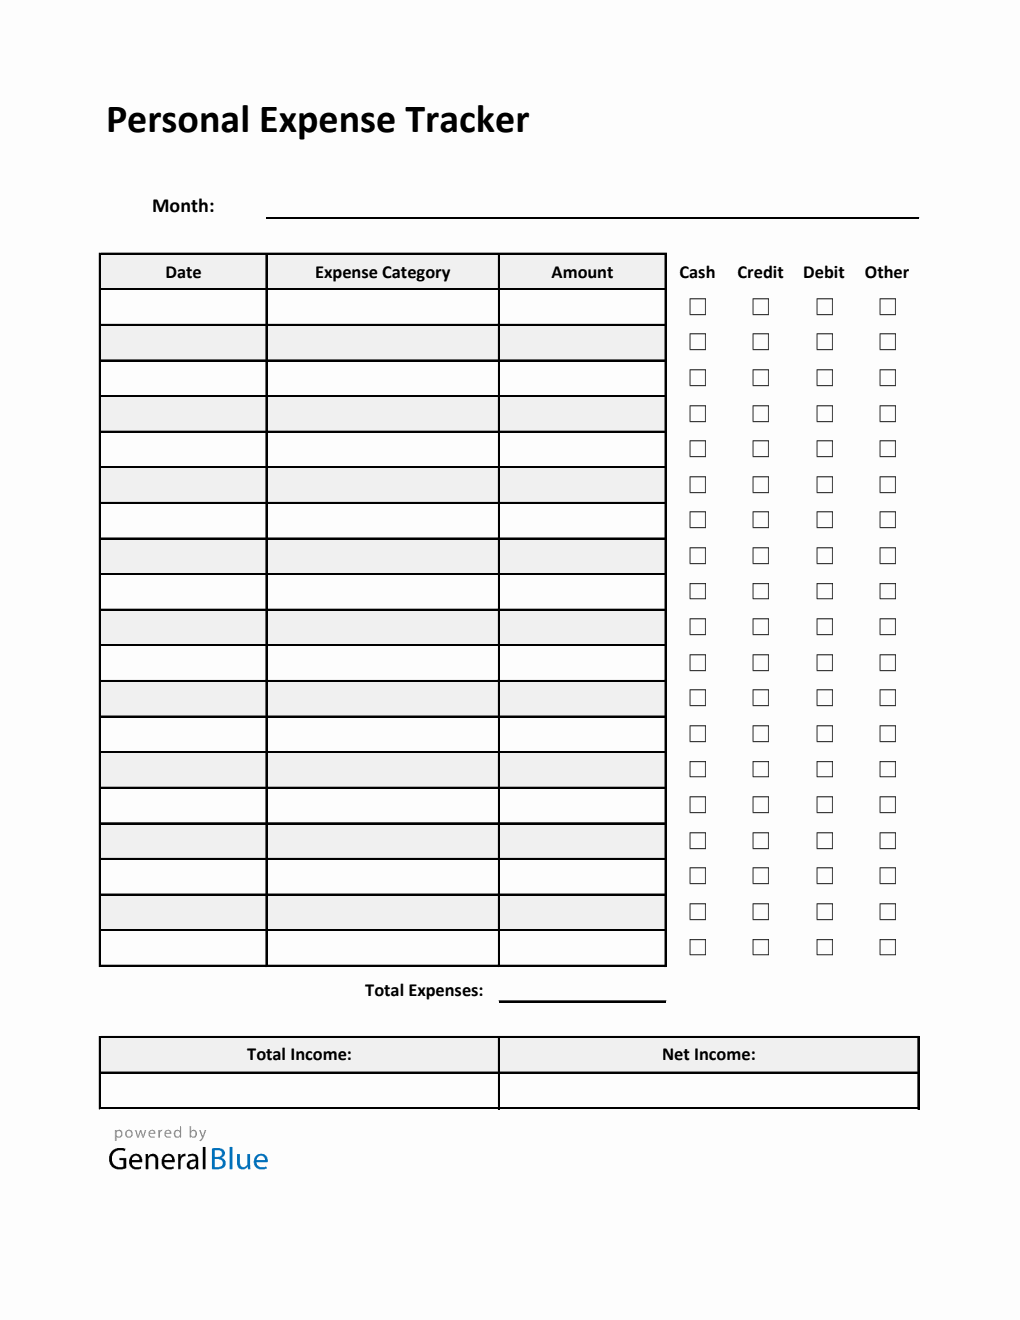 Personal Expense Tracker in Excel (Striped)